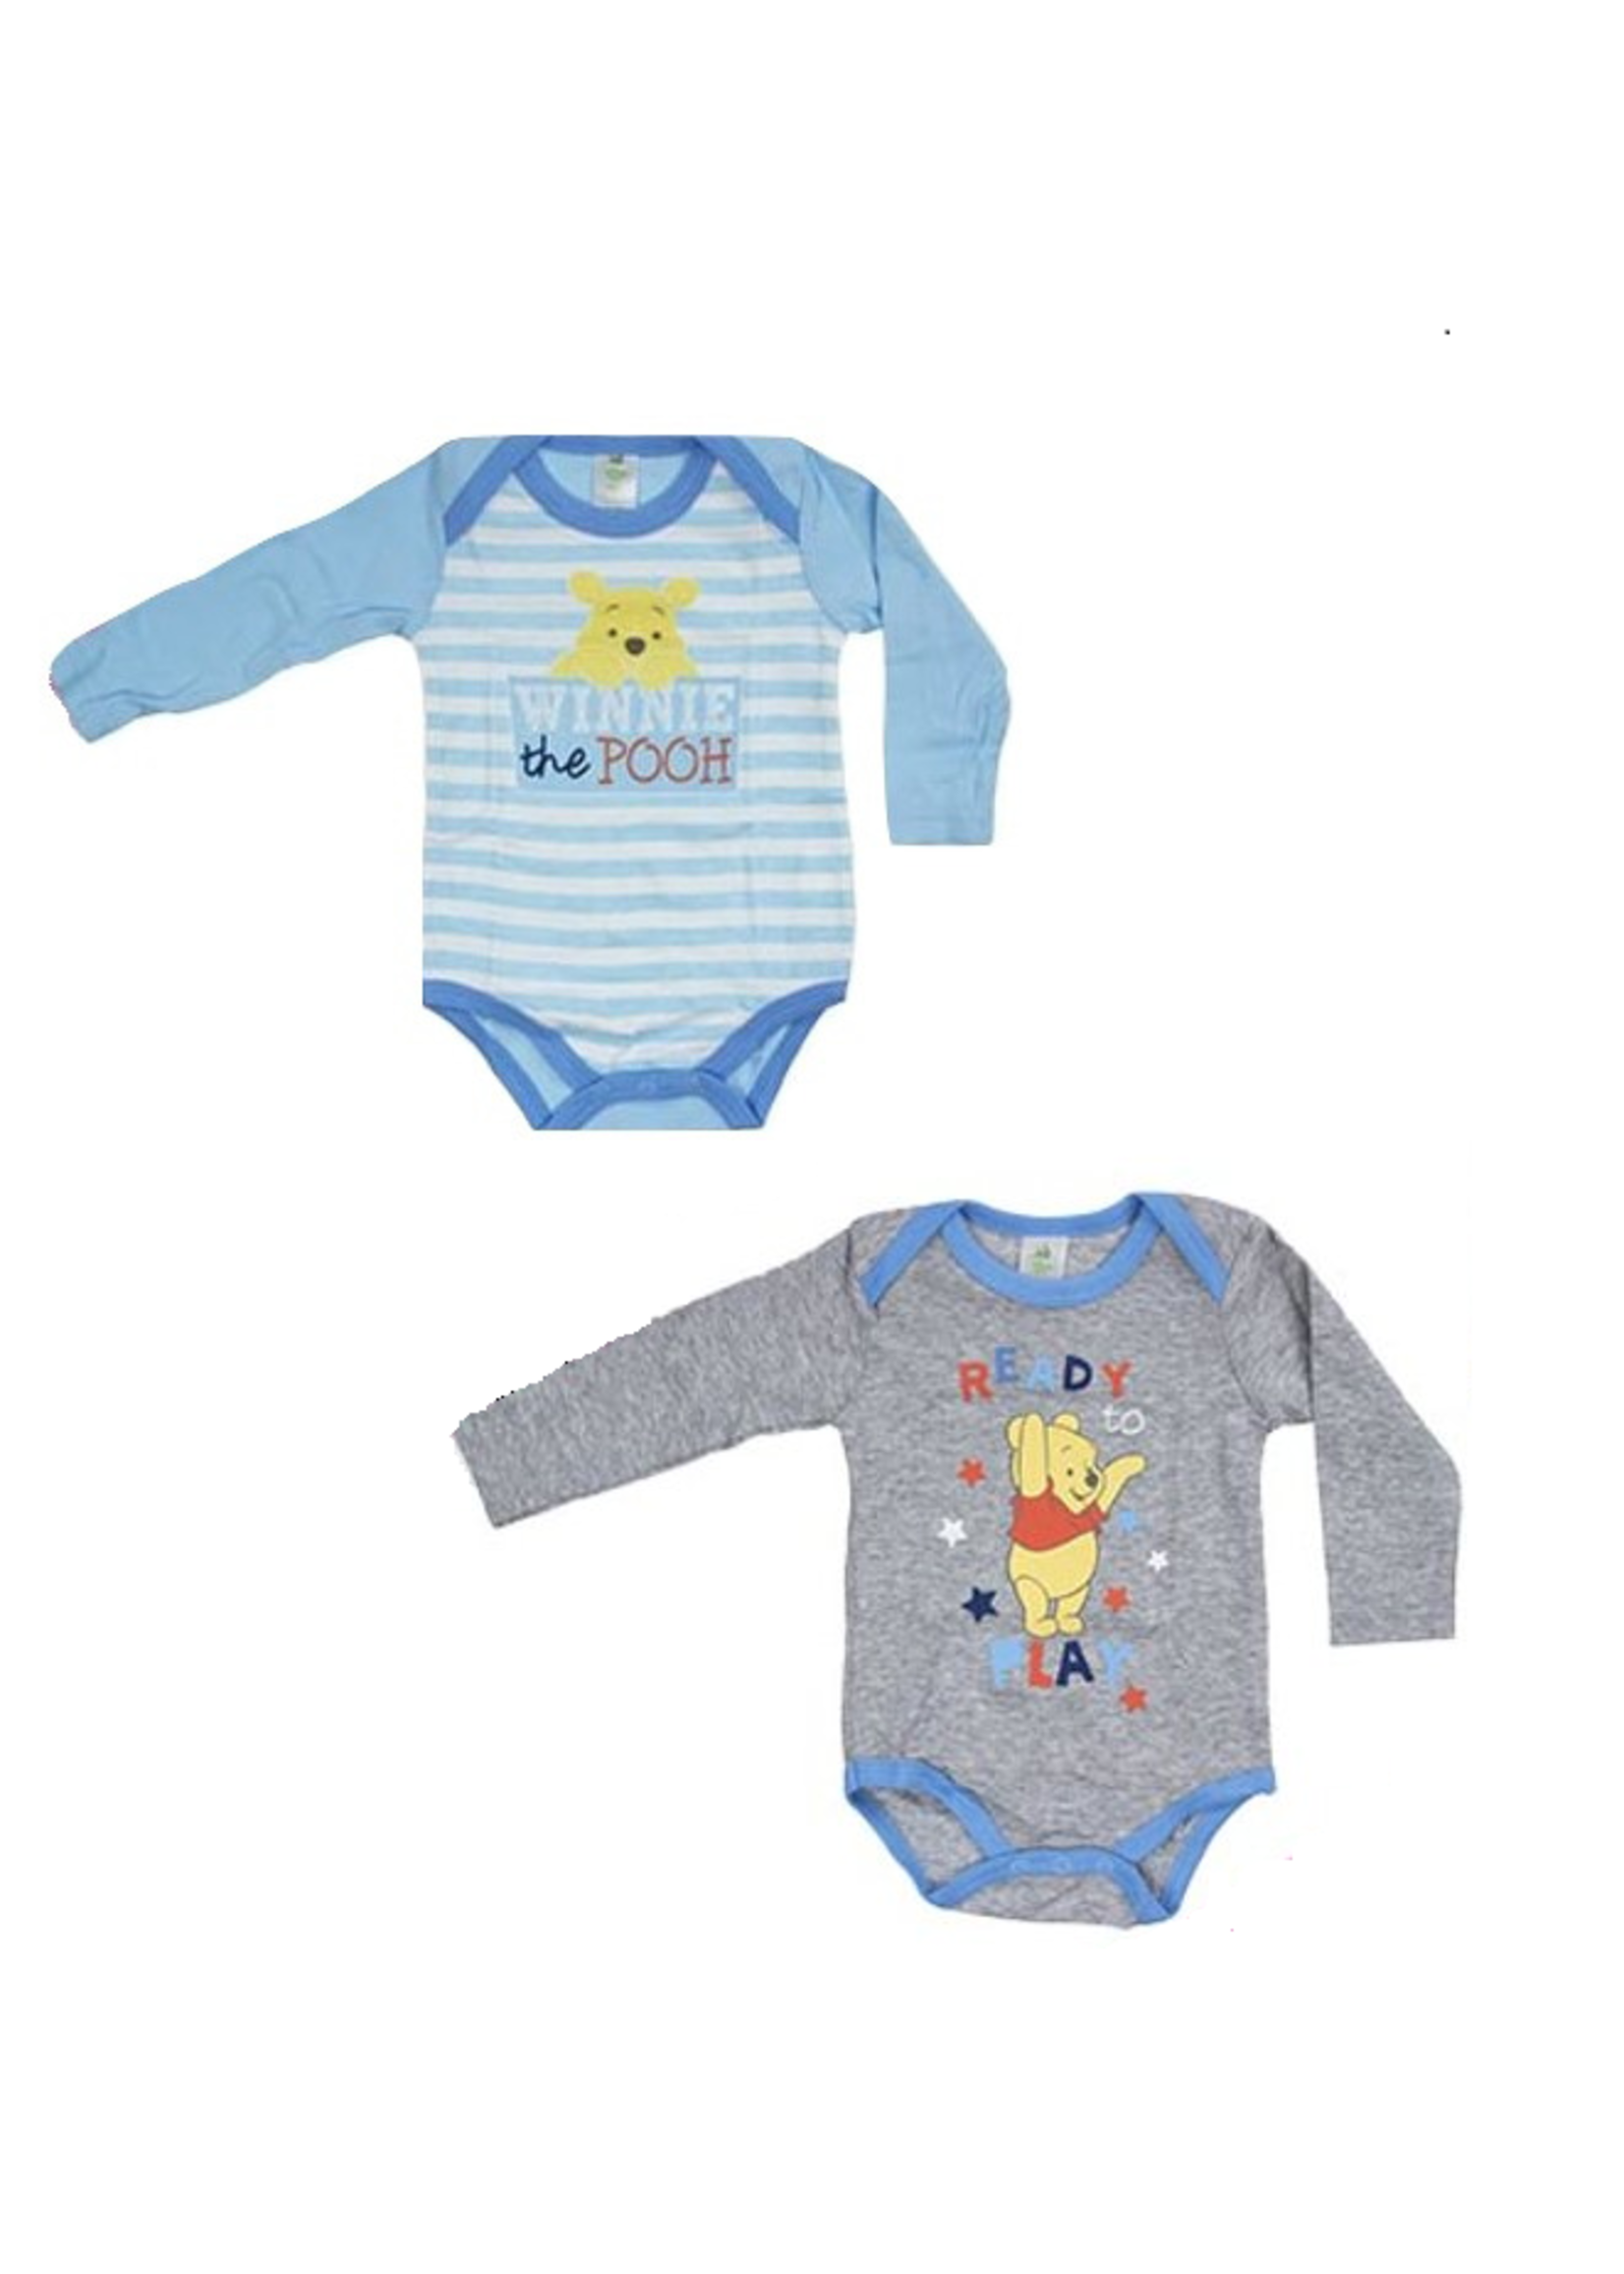 Disney baby Winnie the Pooh rompers from Disney baby 2 pack